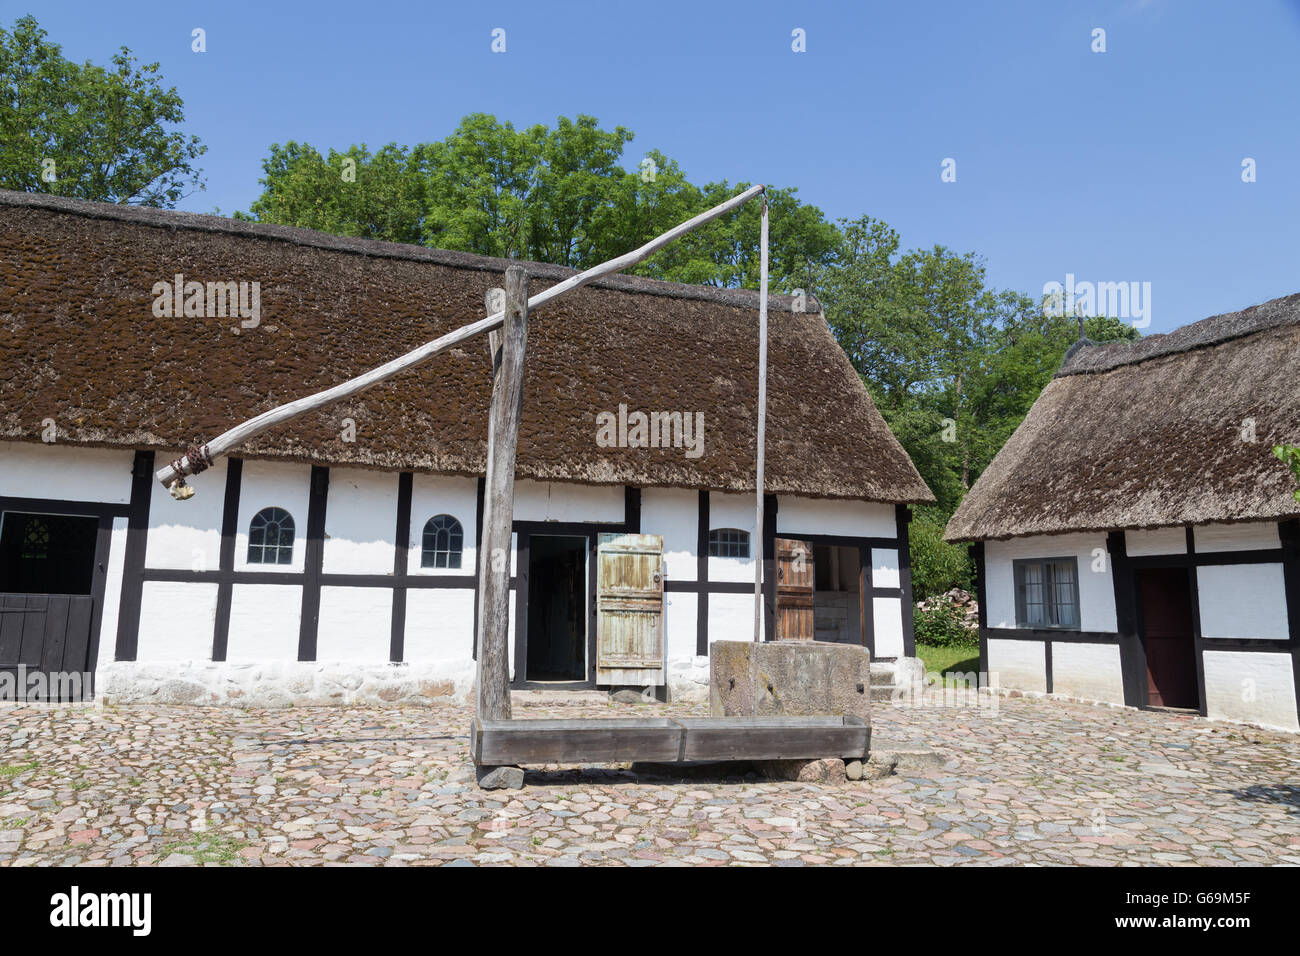 Lyngby, Denmark - June 23, 2016: Sweep well in courtyard of old danish farmhouse. Stock Photo